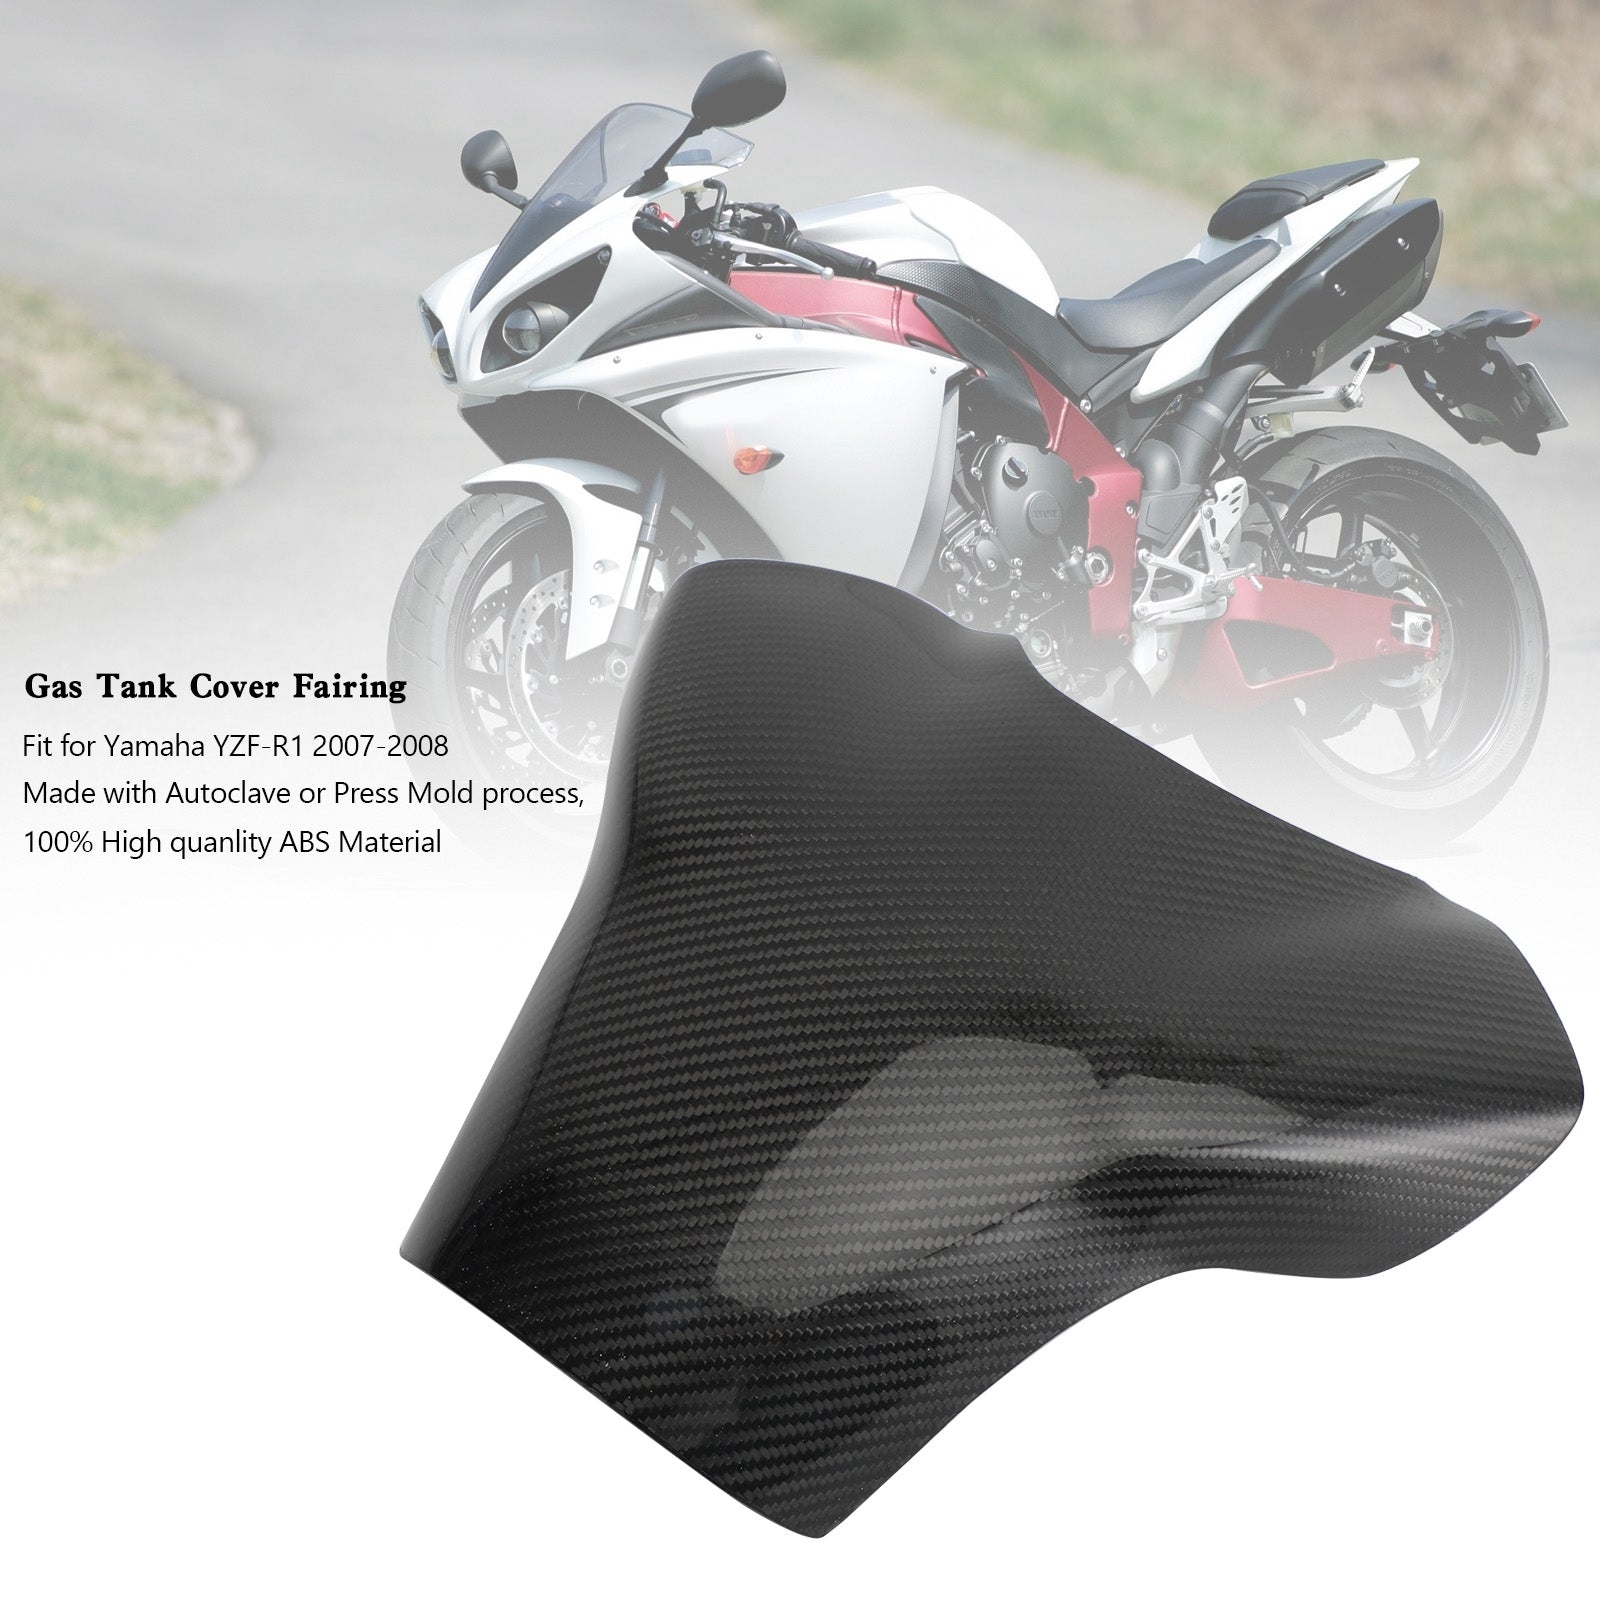 Gas Tank Cover Panel Fairing Protector For Yamaha YZF-R1 2007-2008 Carbon